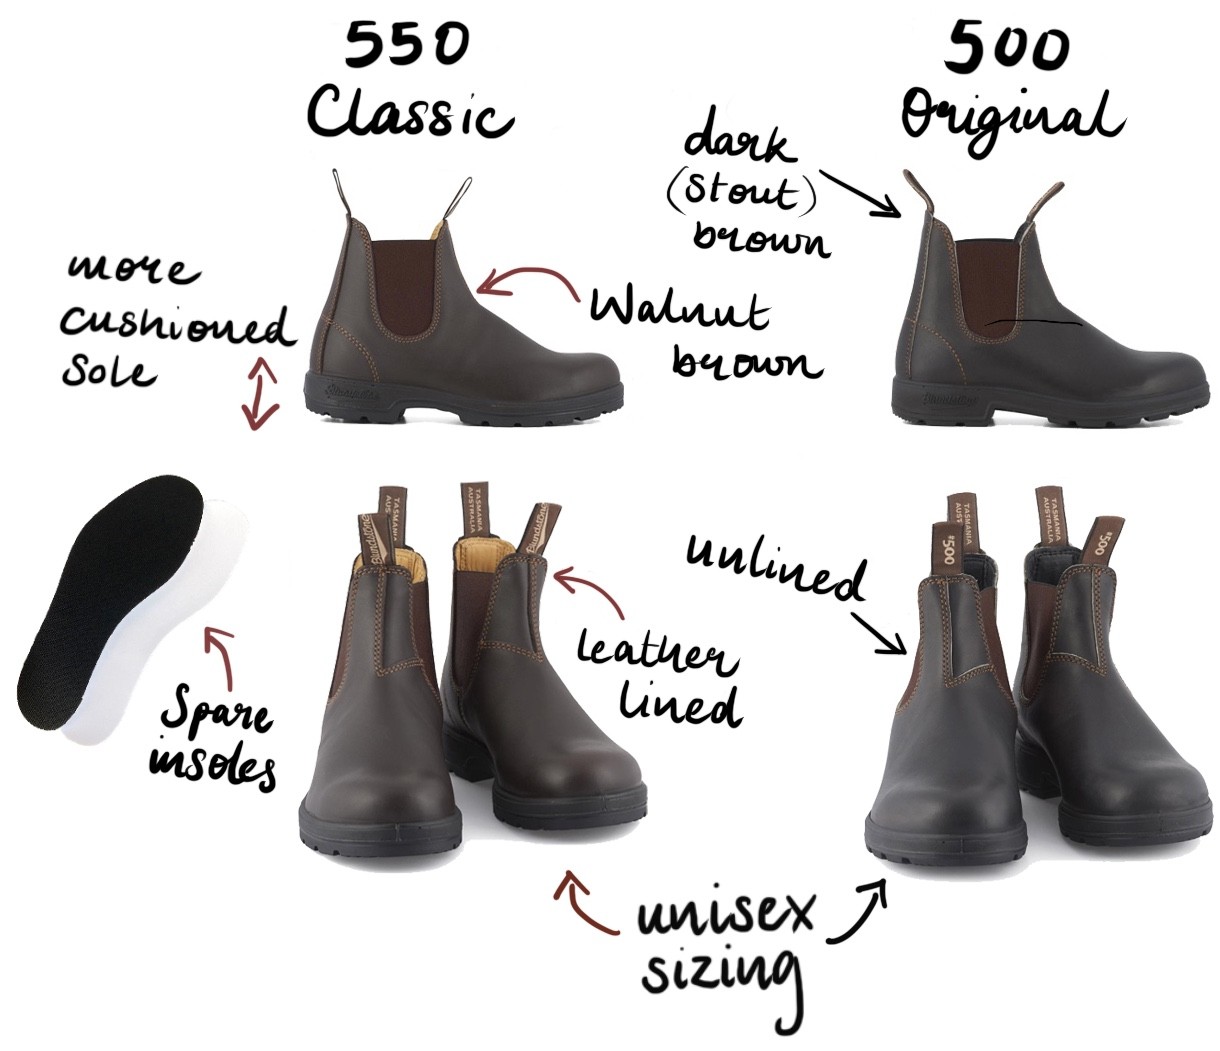 What is the Dfference Between Men and Womens Blundstones?